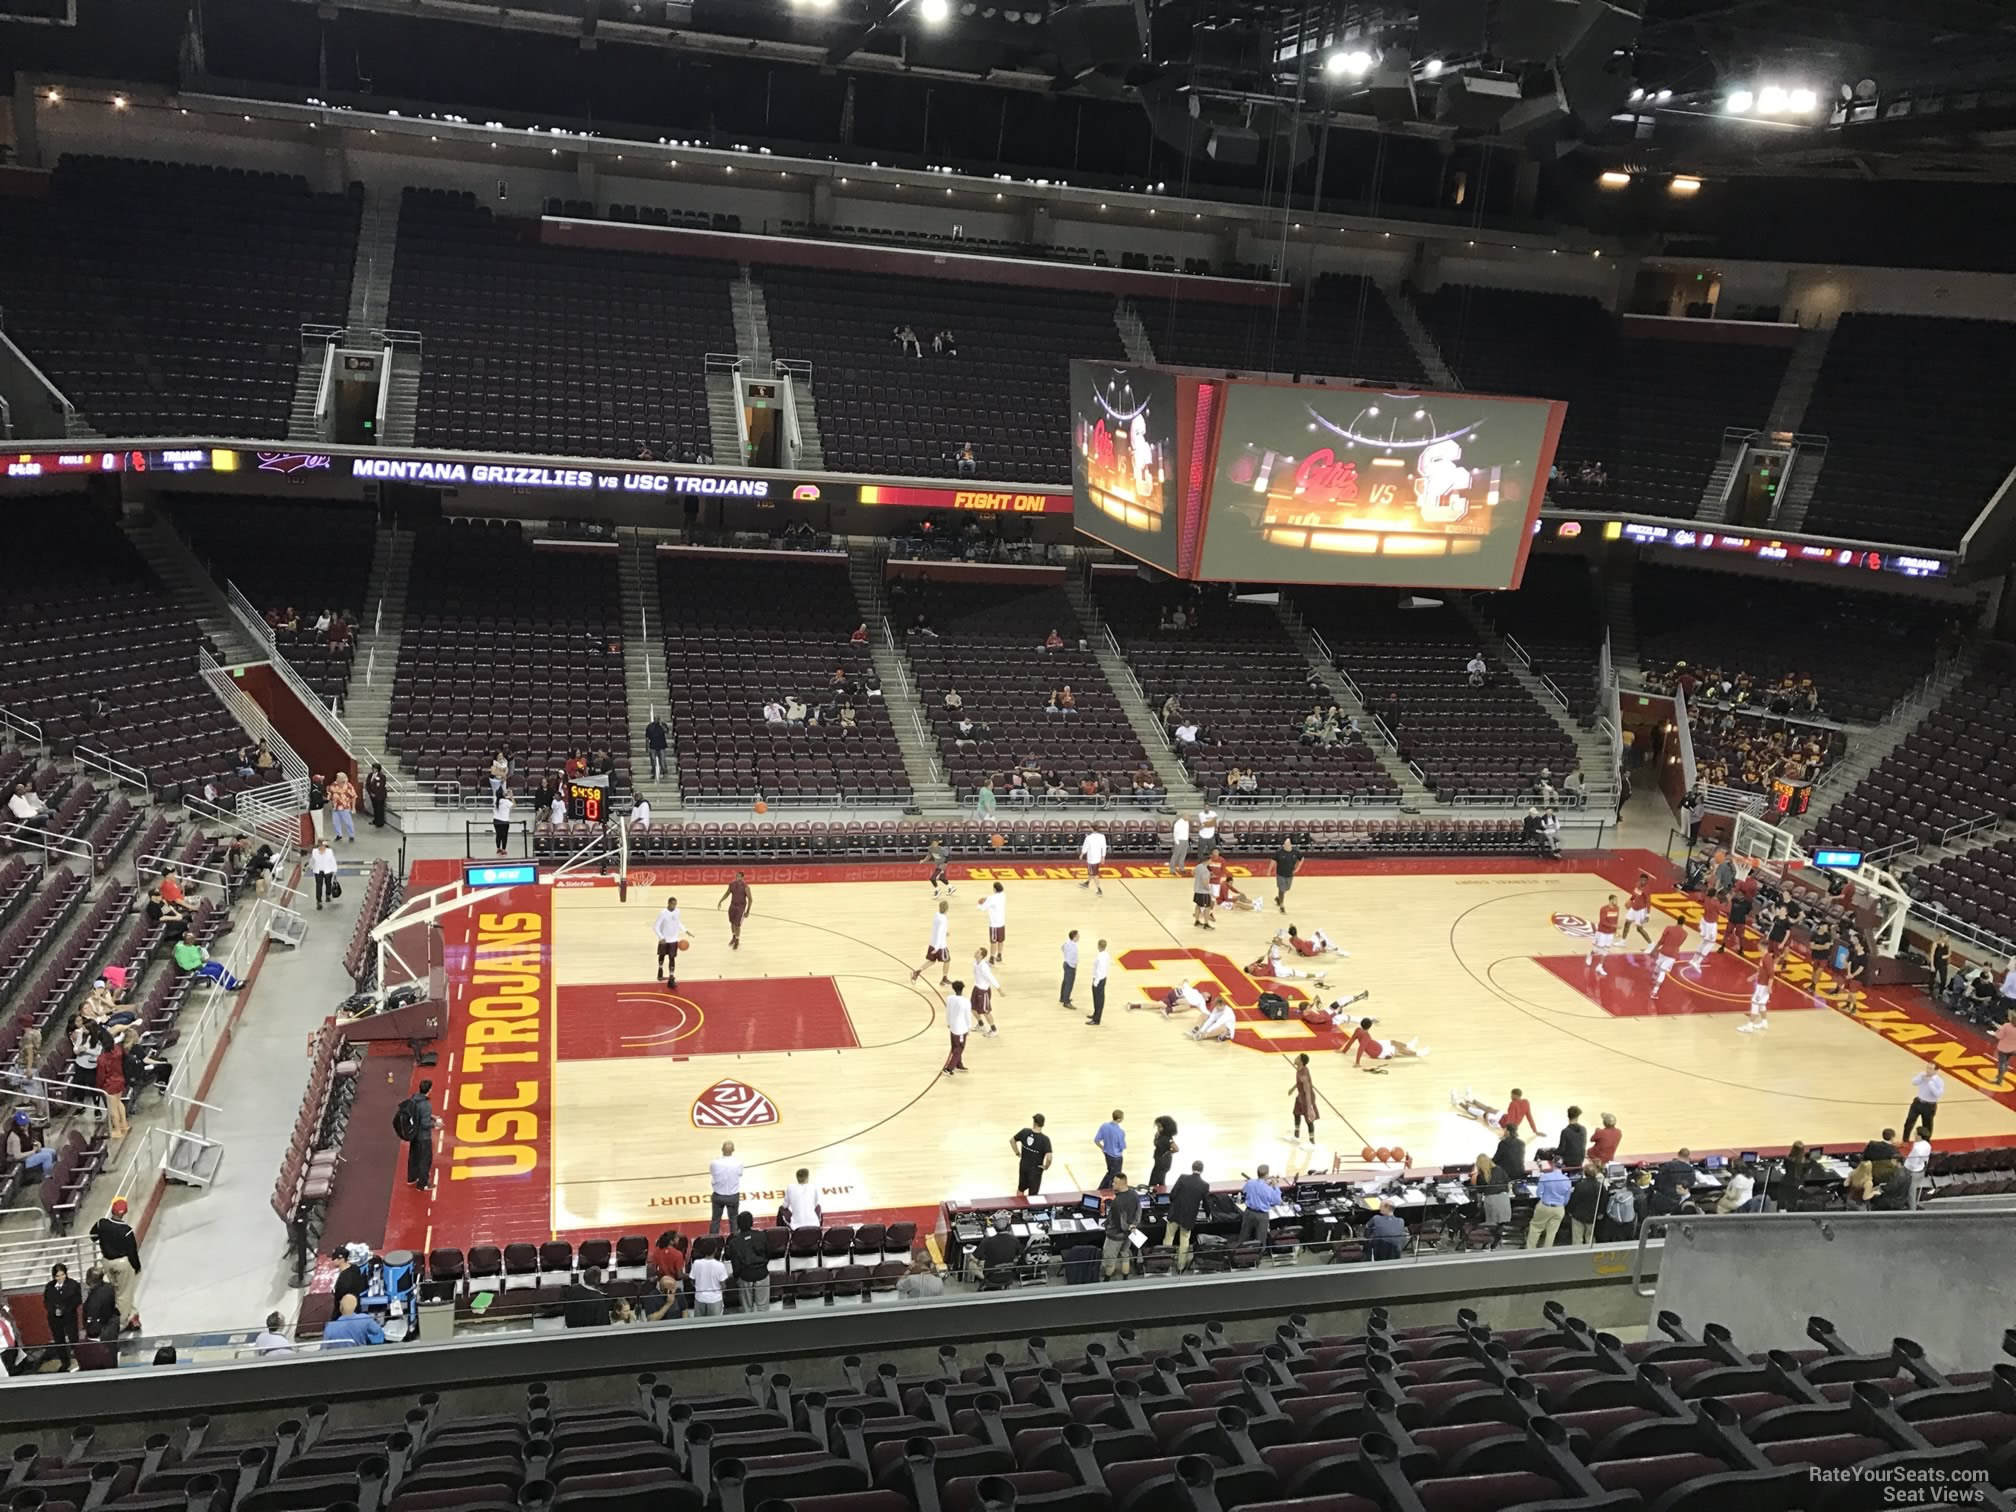 section 217, row 10 seat view  - galen center